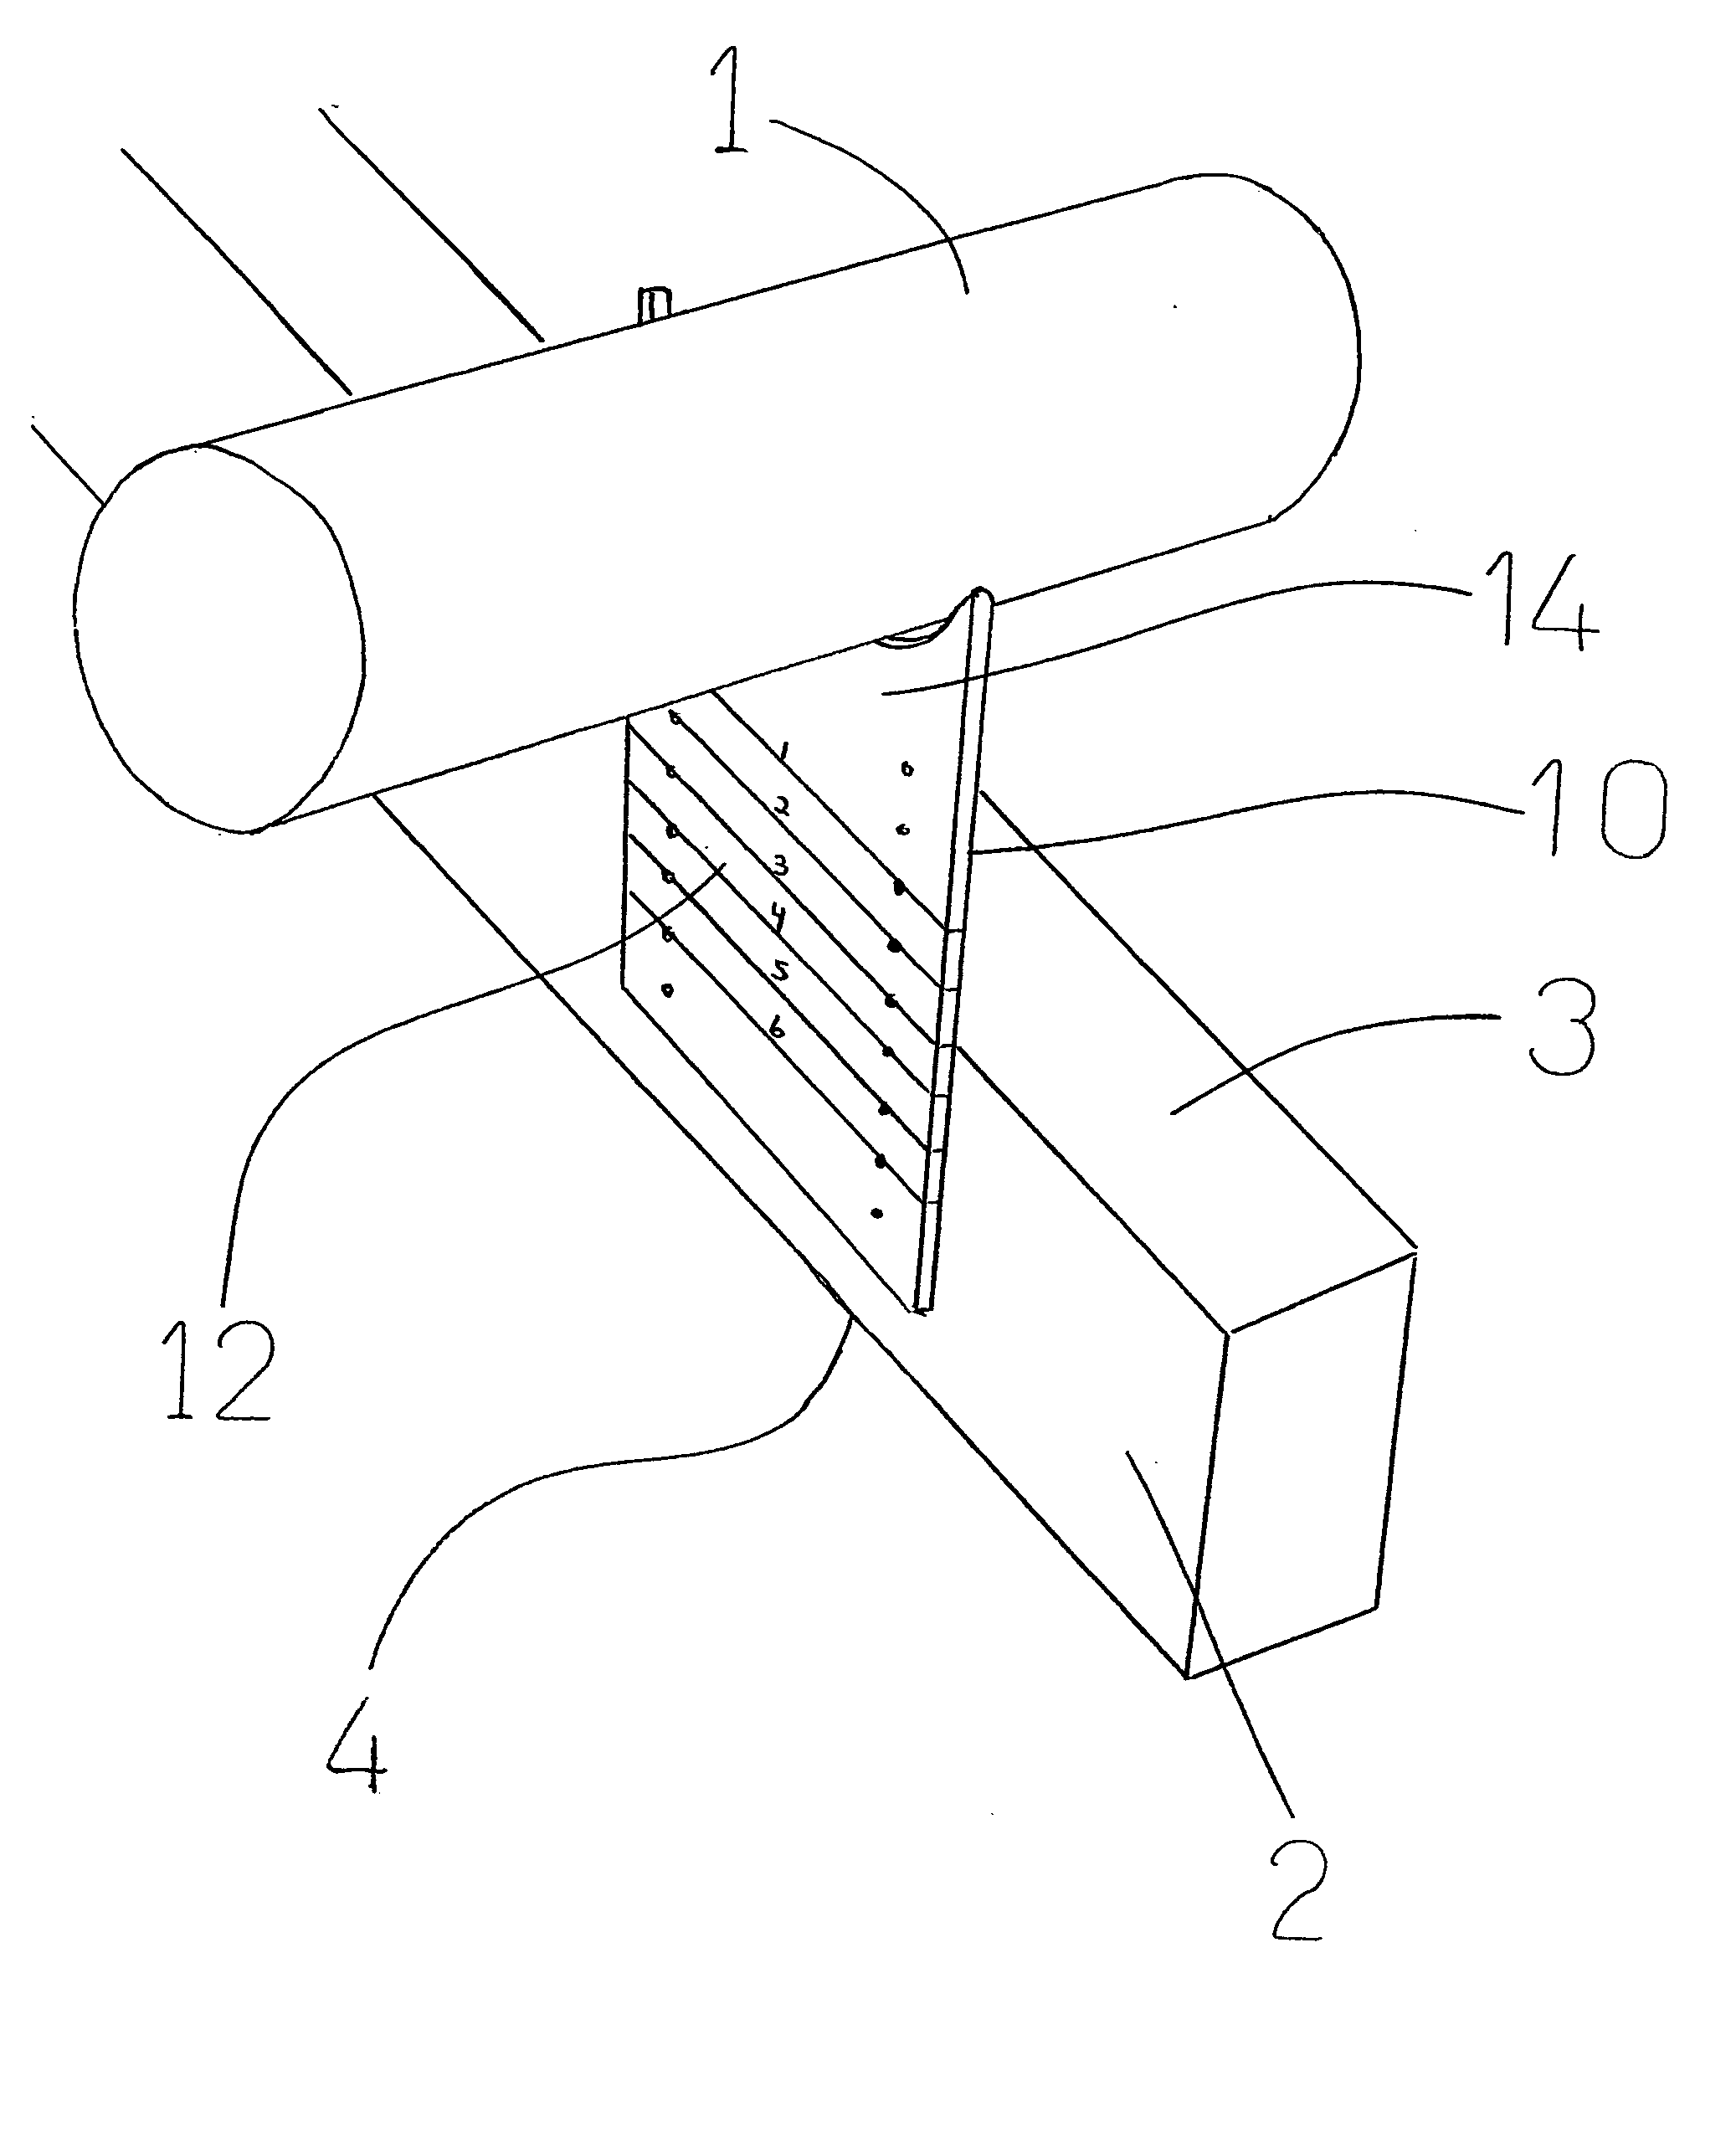 Vent pipe support system and method of installation